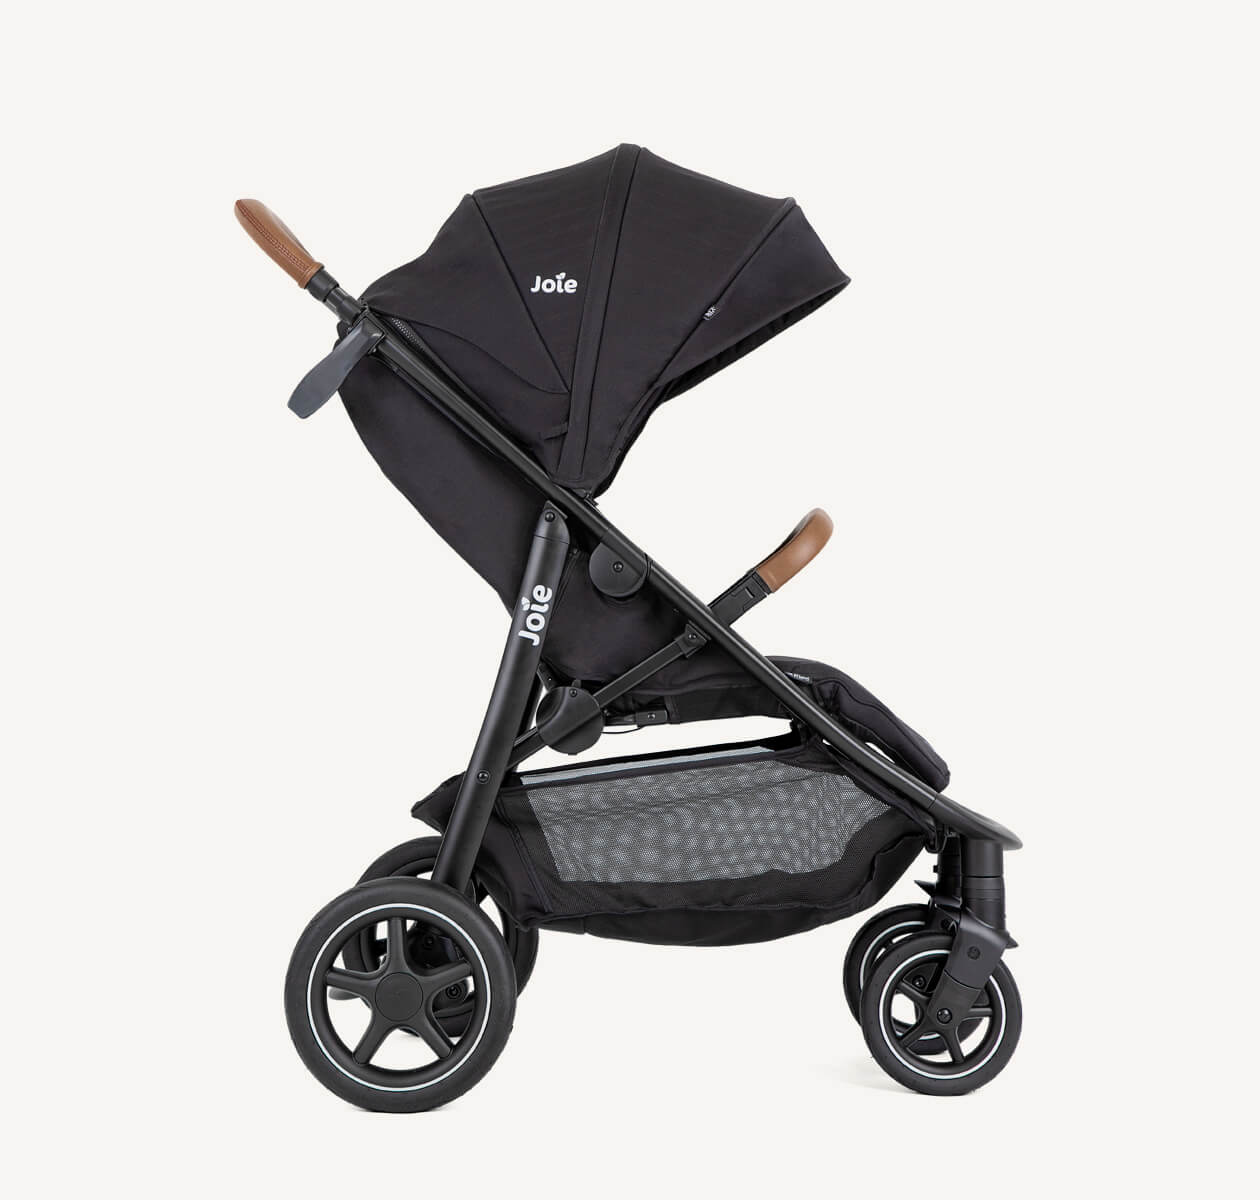 Joie Mytrax Pro Stroller with Raincover - Shale